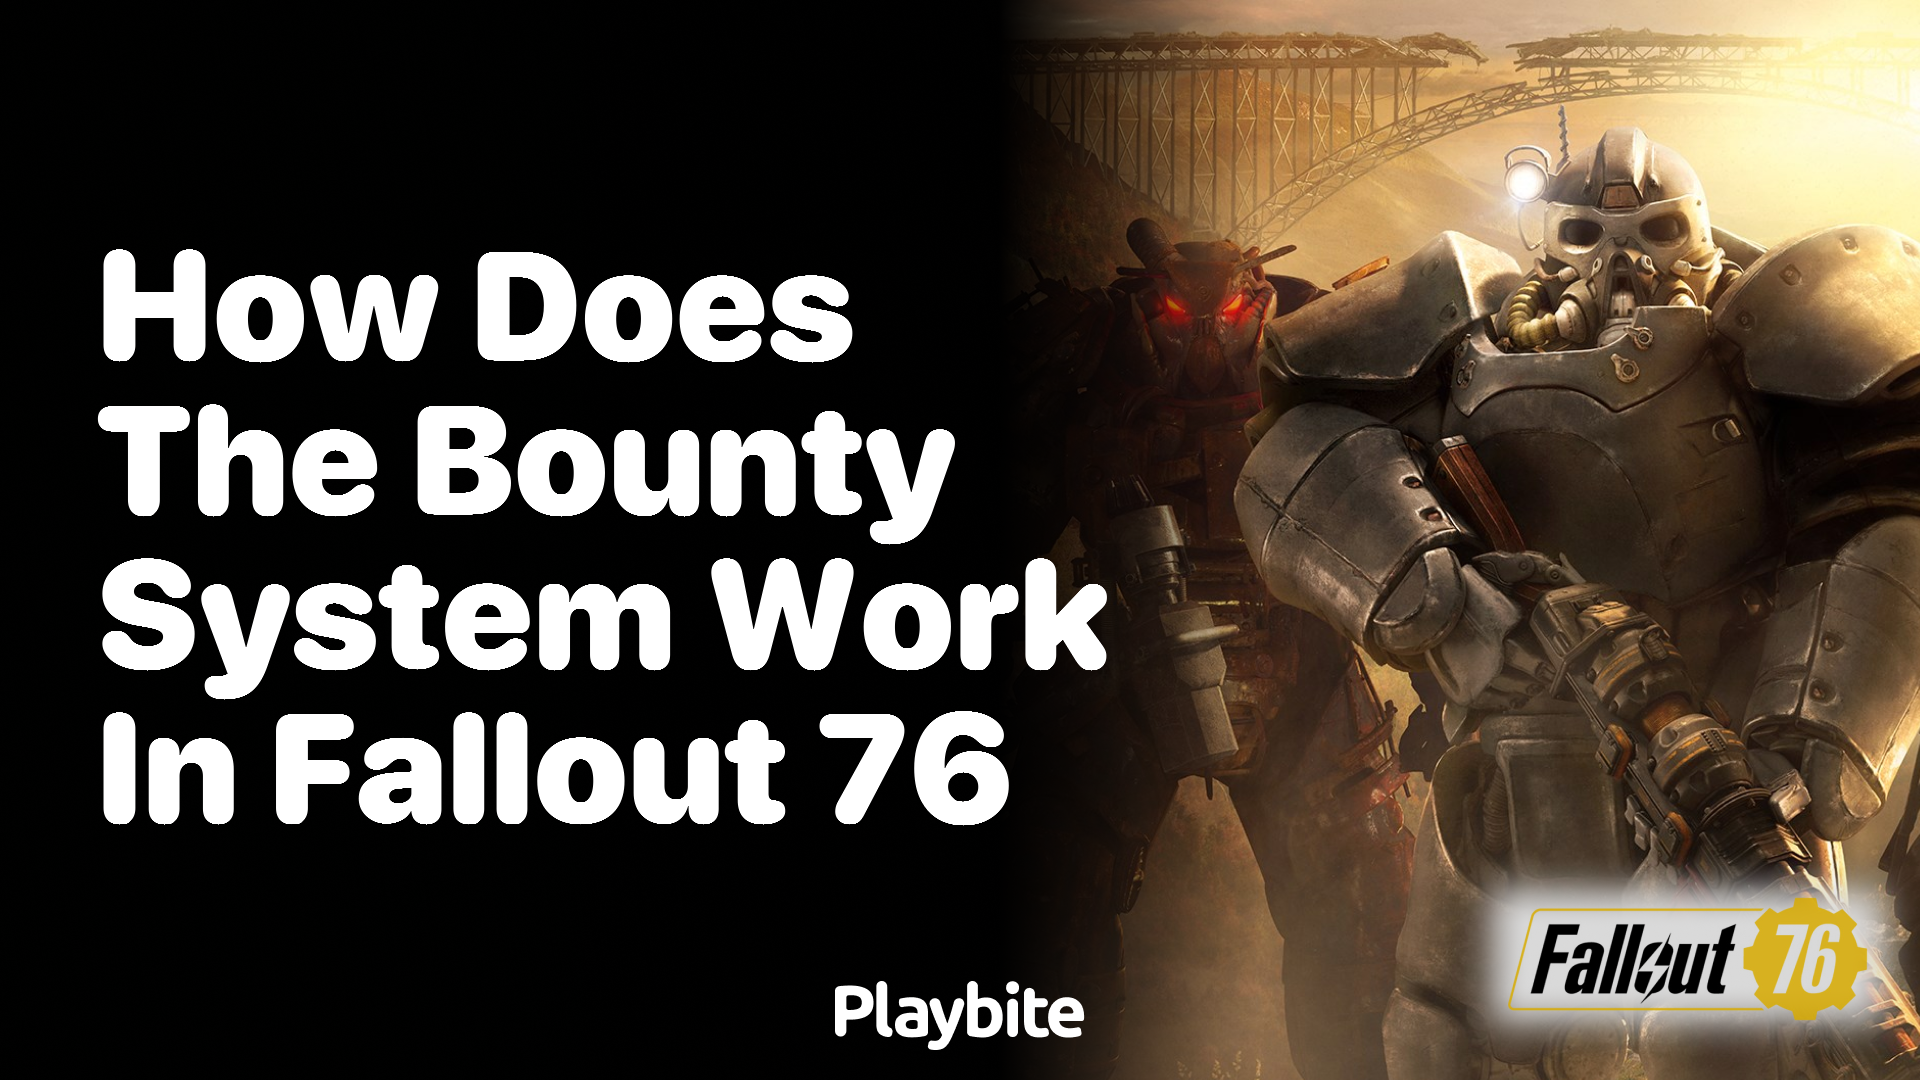 How does the bounty system work in Fallout 76?